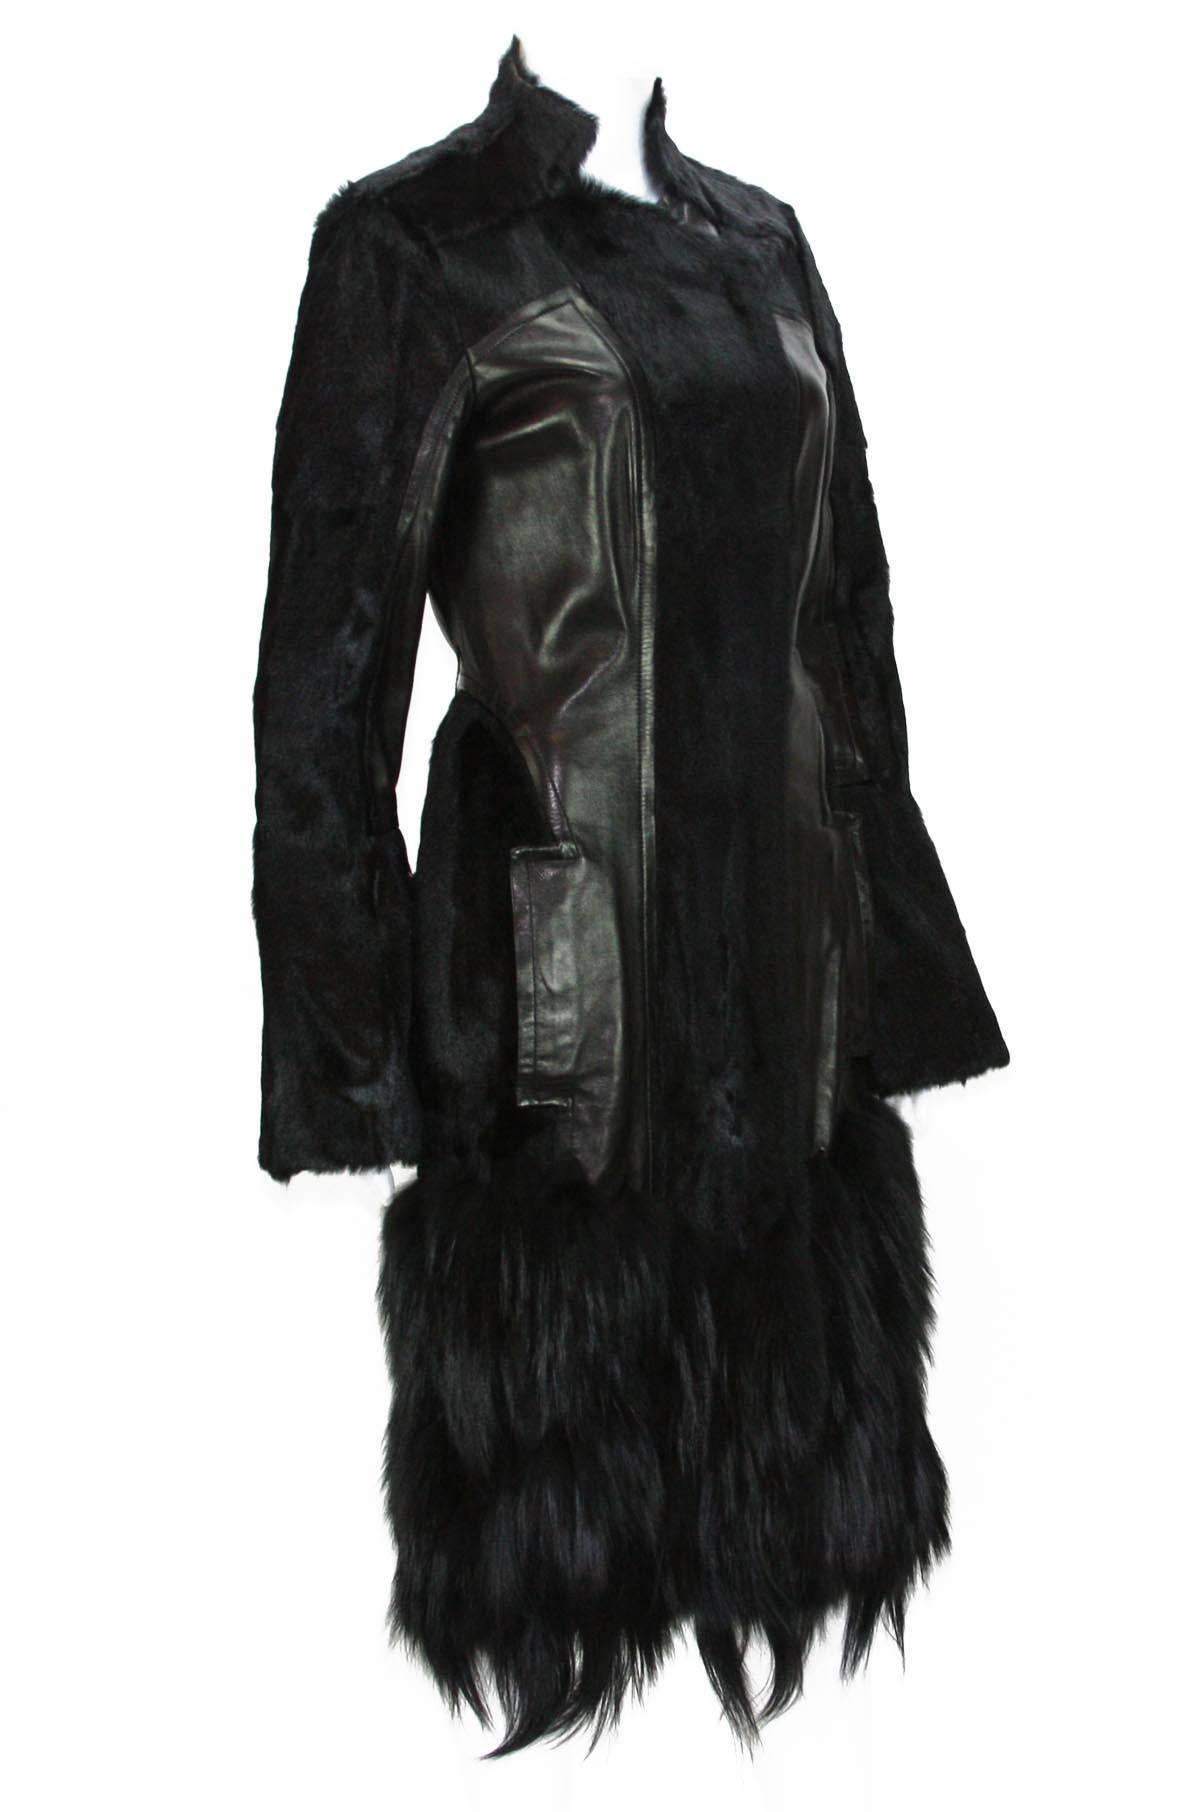 NEW TOM FORD FOR GUCCI FUR LEATHER COAT
Rare and Highly Collectible
F/W 2004 Collection
Goat, Fox, Leather
Zip and Hooks Closure
Two Side Pockets
Silk Lining
Designer size 44 (run small)
Measurements: Length - 39 inches + Fur, Sleeve - 26 inches,